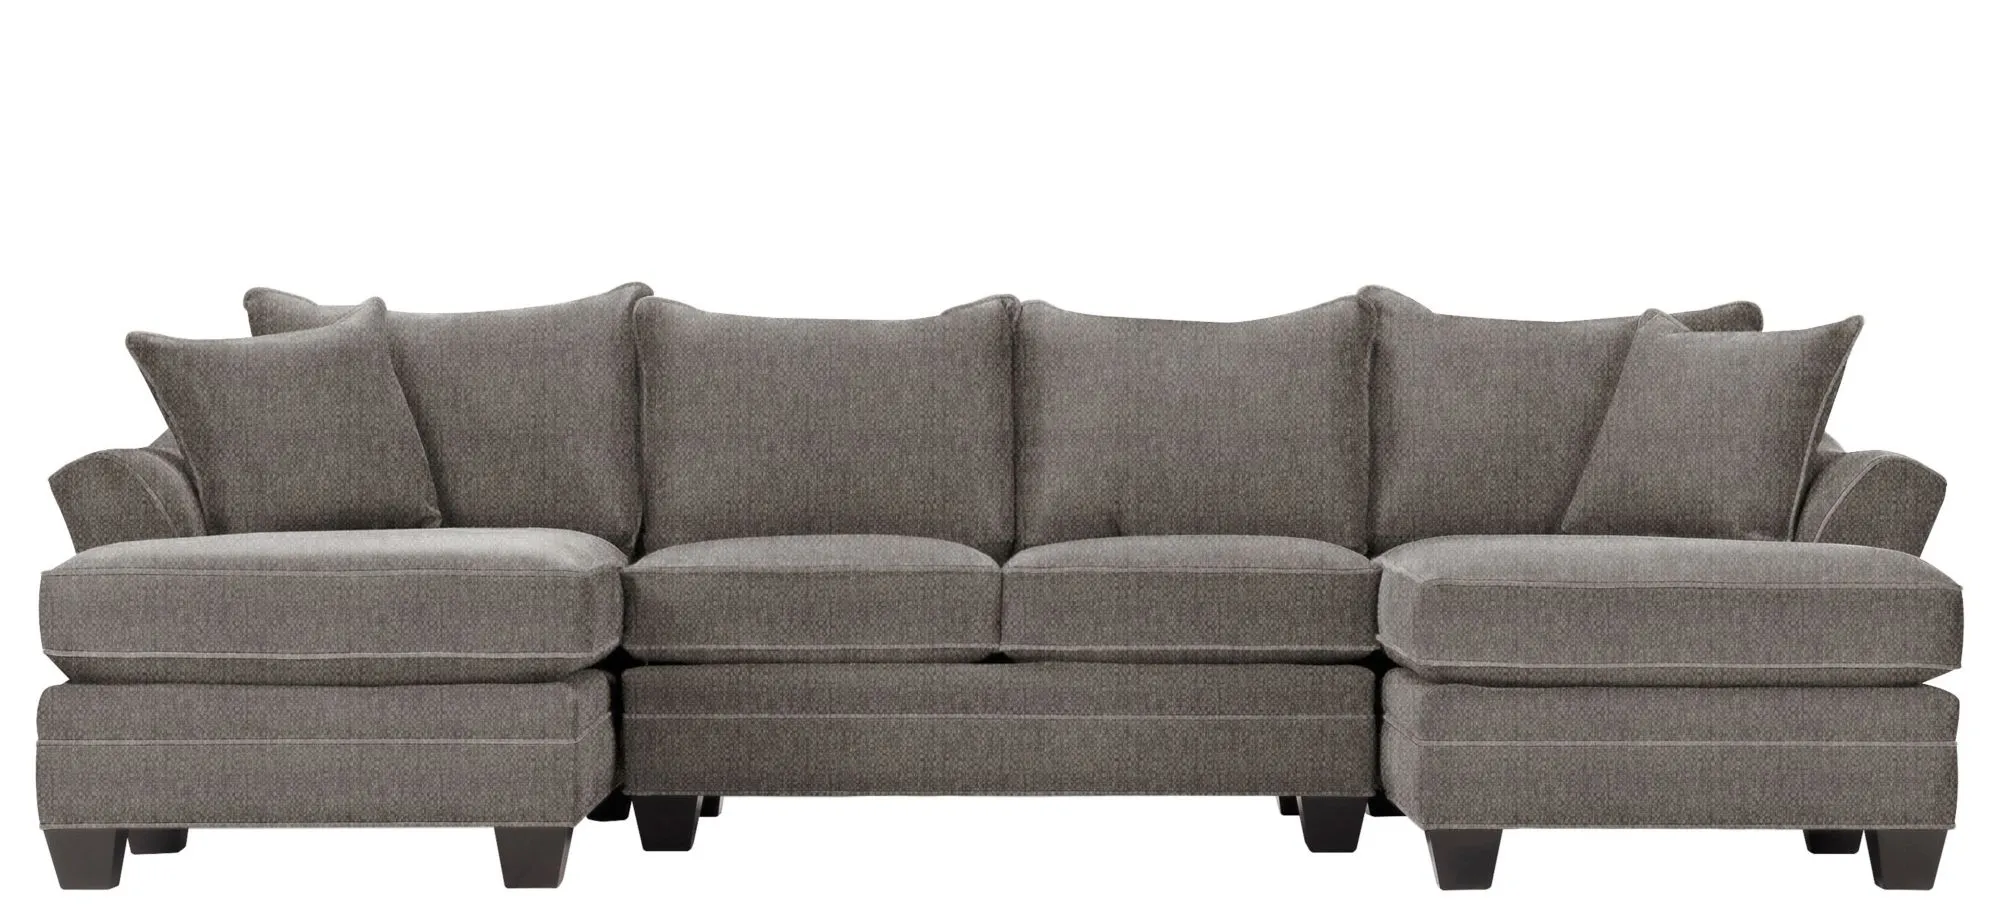 Foresthill 3-pc. Symmetrical Chaise Sectional Sofa in Sugar Shack Stone by H.M. Richards